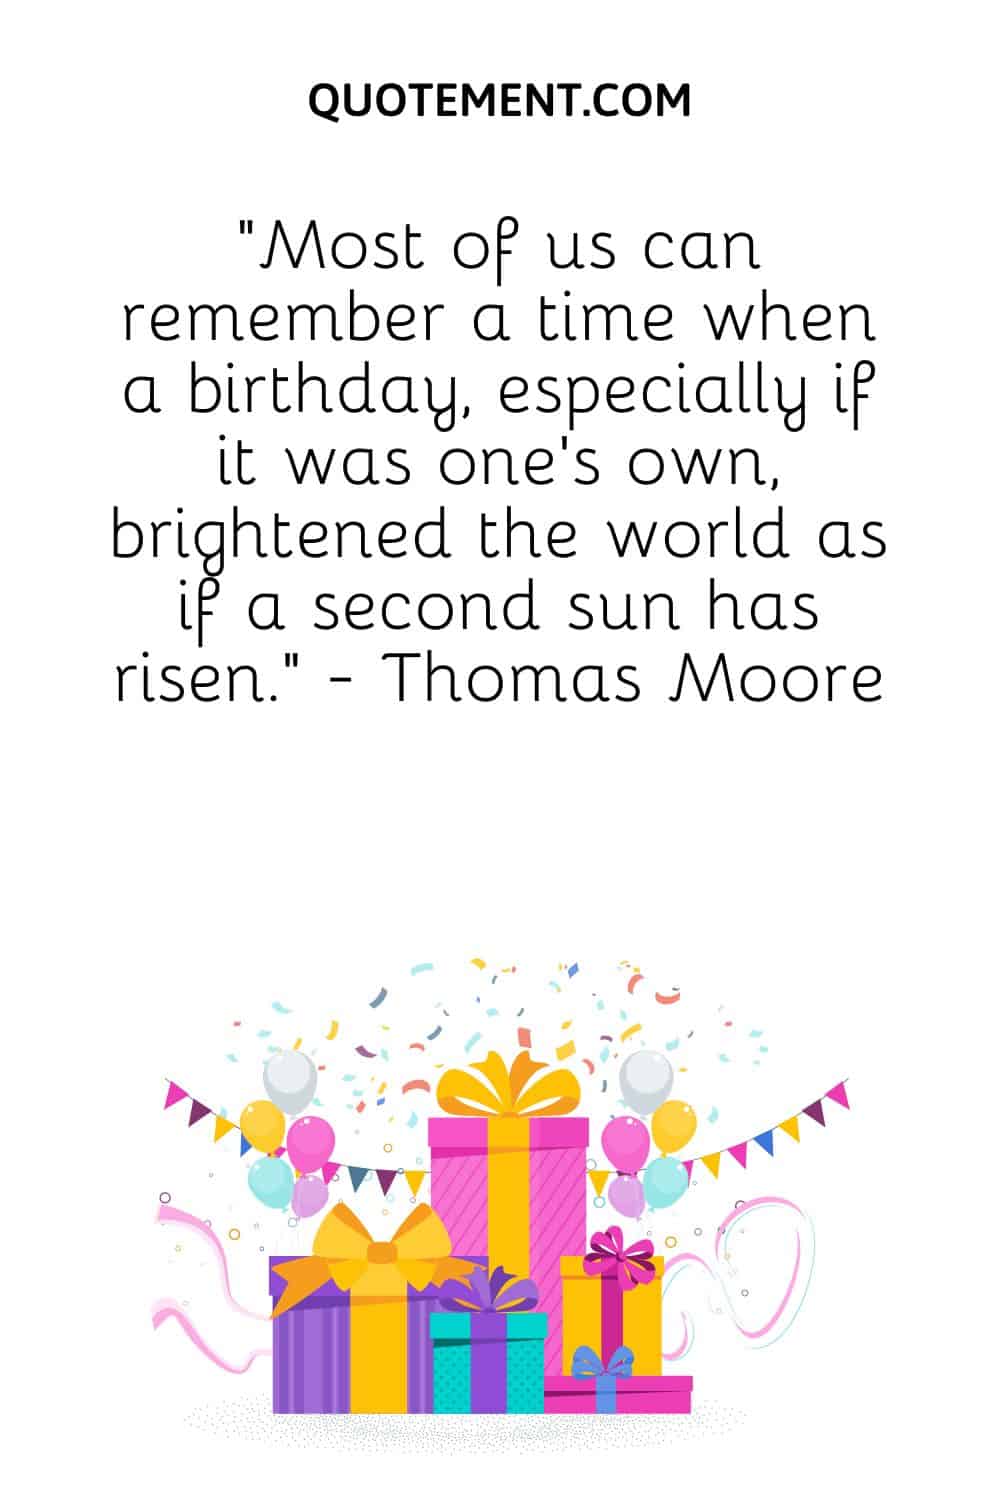 Most of us can remember a time when a birthday, especially if it was one’s own, brightened the world as if a second sun has risen